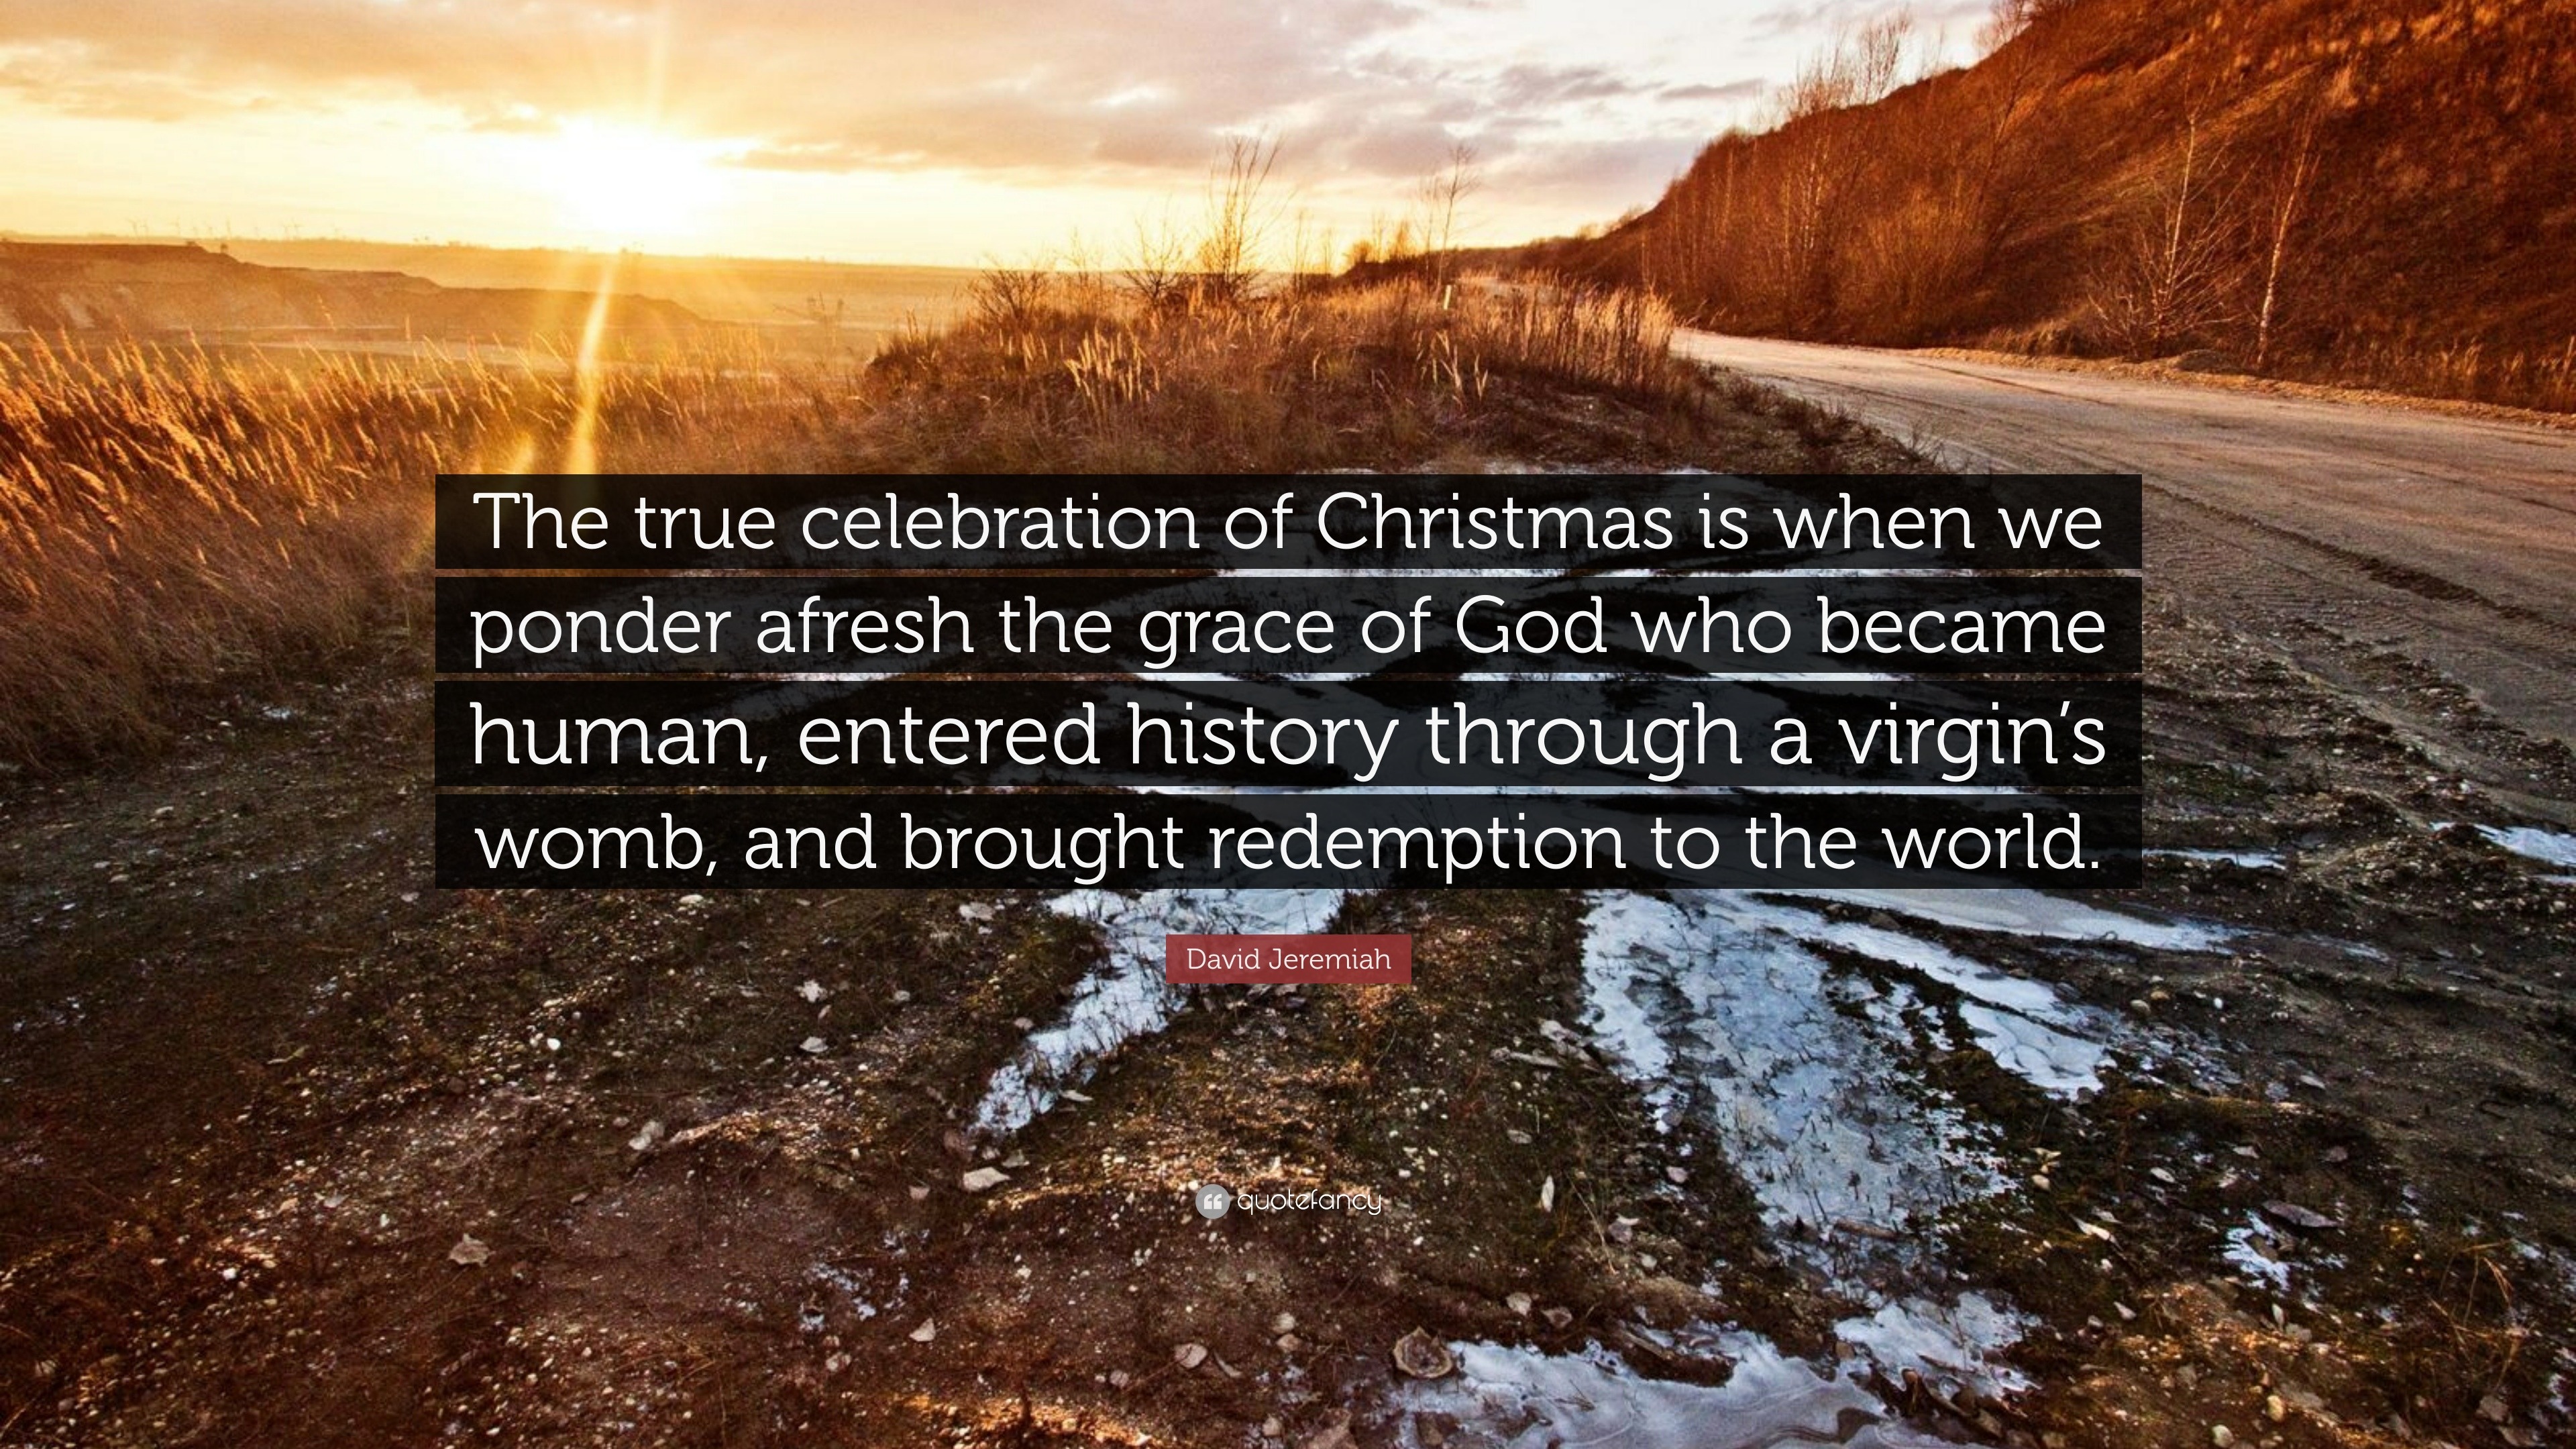 David Jeremiah Quote “The true celebration of Christmas is when we ponder afresh the